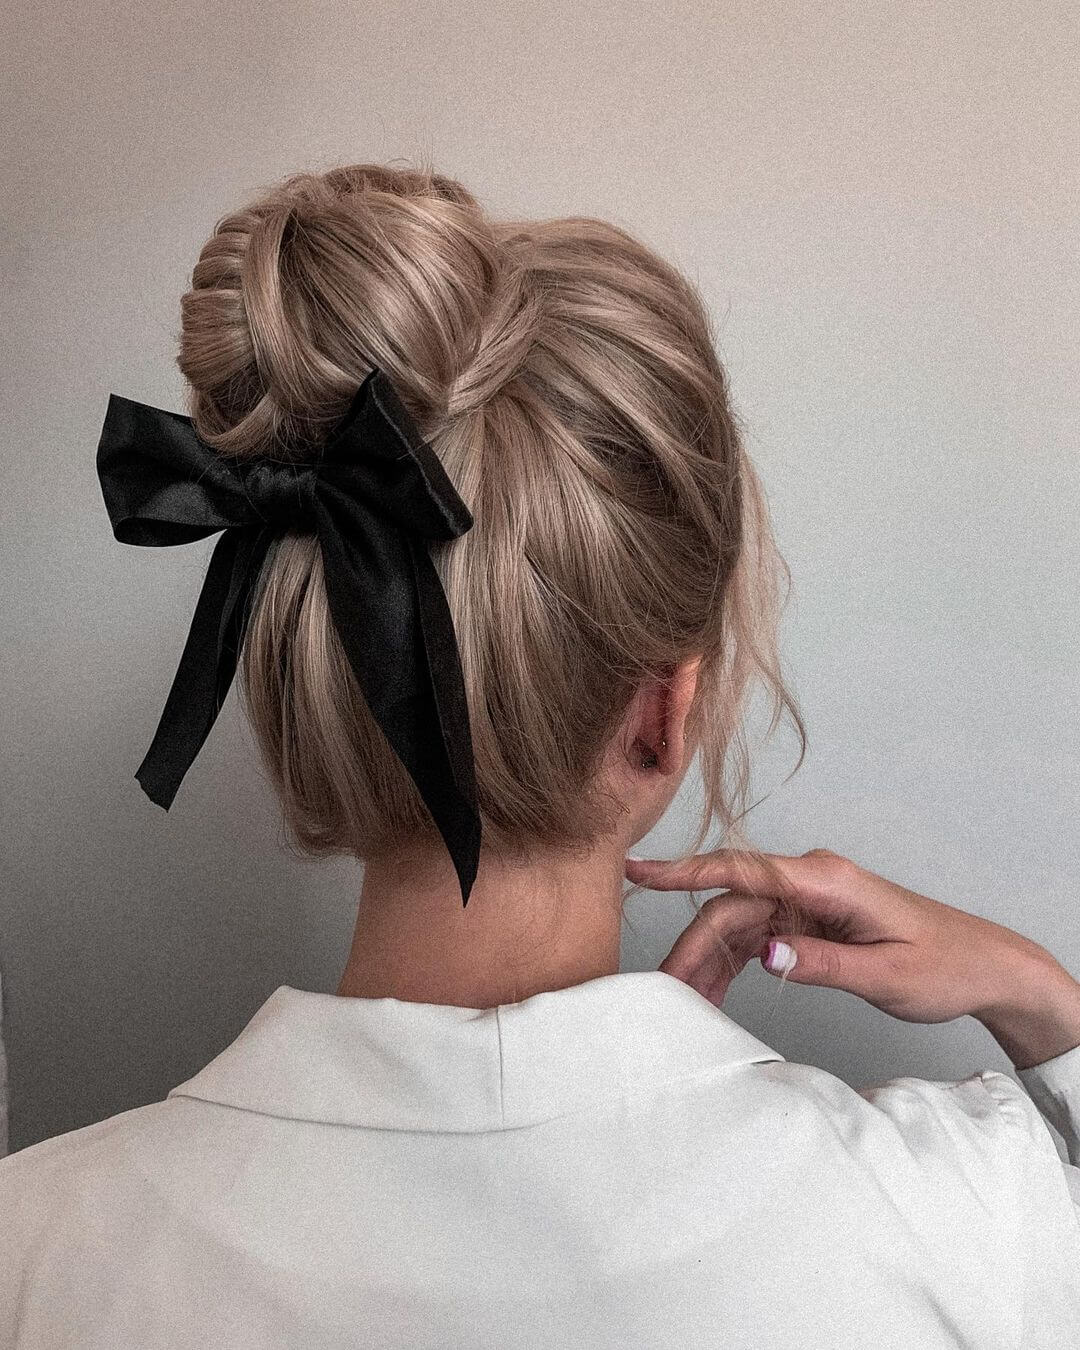 Office Hairstyle For Woman with Long Hair Glamed The Bun